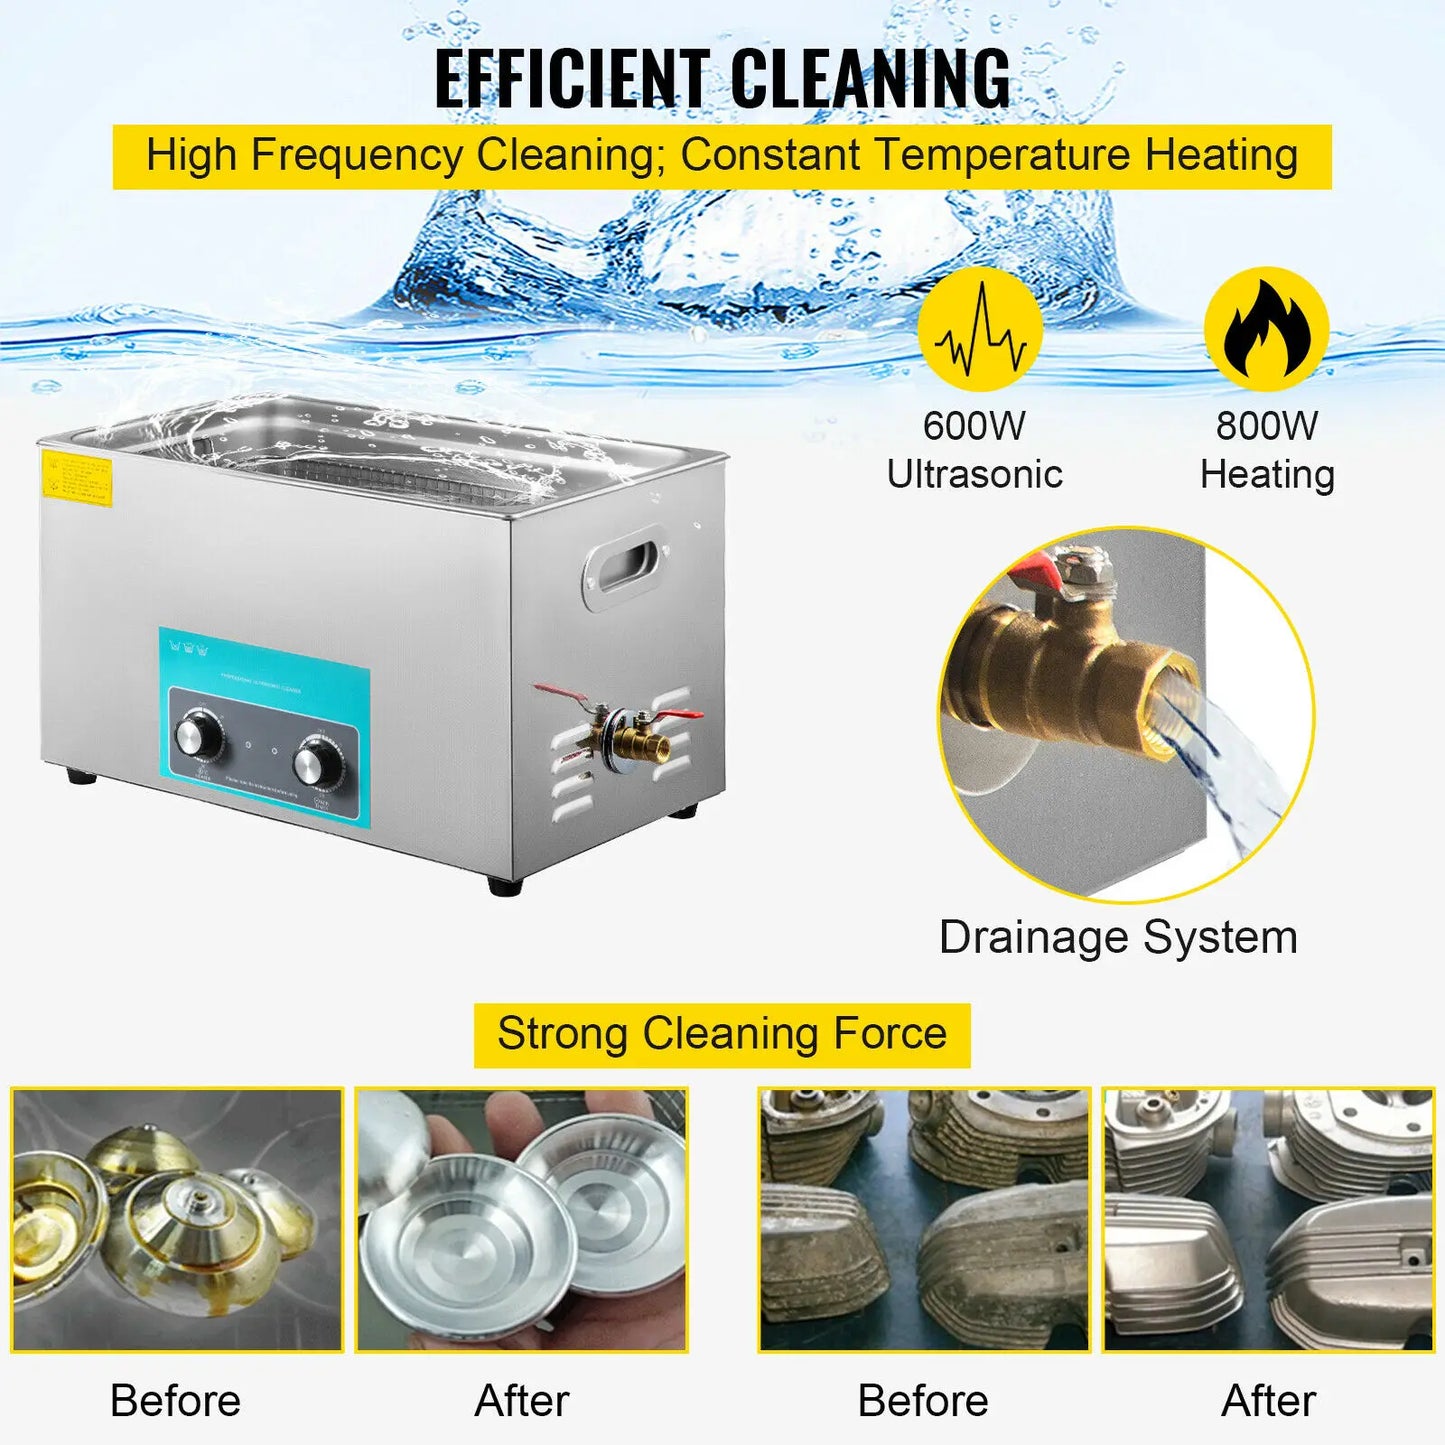 VEVOR 3L 6L 10L 15L 22L 30L Electric Ultrasonic Cleaner Portable Washing Machine Lave-Dishes Diswasher Ultrasound Home Appliance